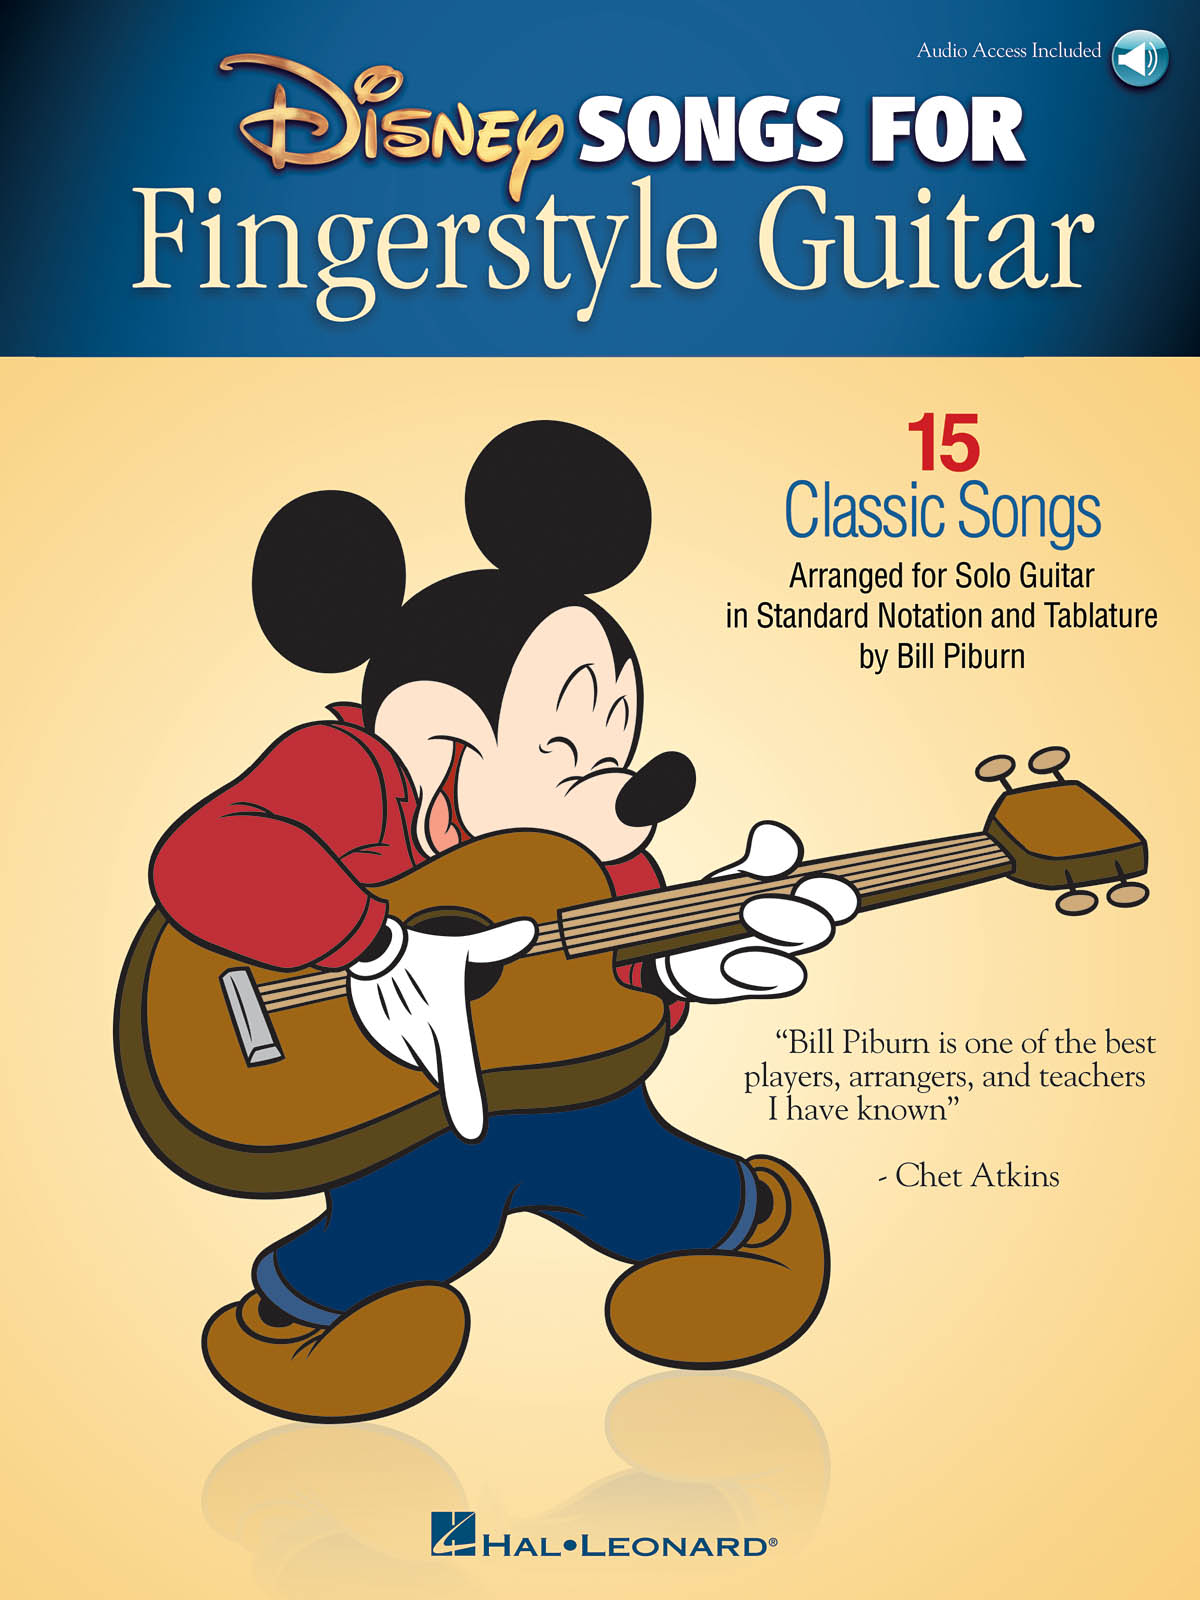 Disney Songs for Fingerstyle Guitar - 15 Classic Songs Arranged by Solo Guitar in Standard Notation and Tablature - noty na kytaru